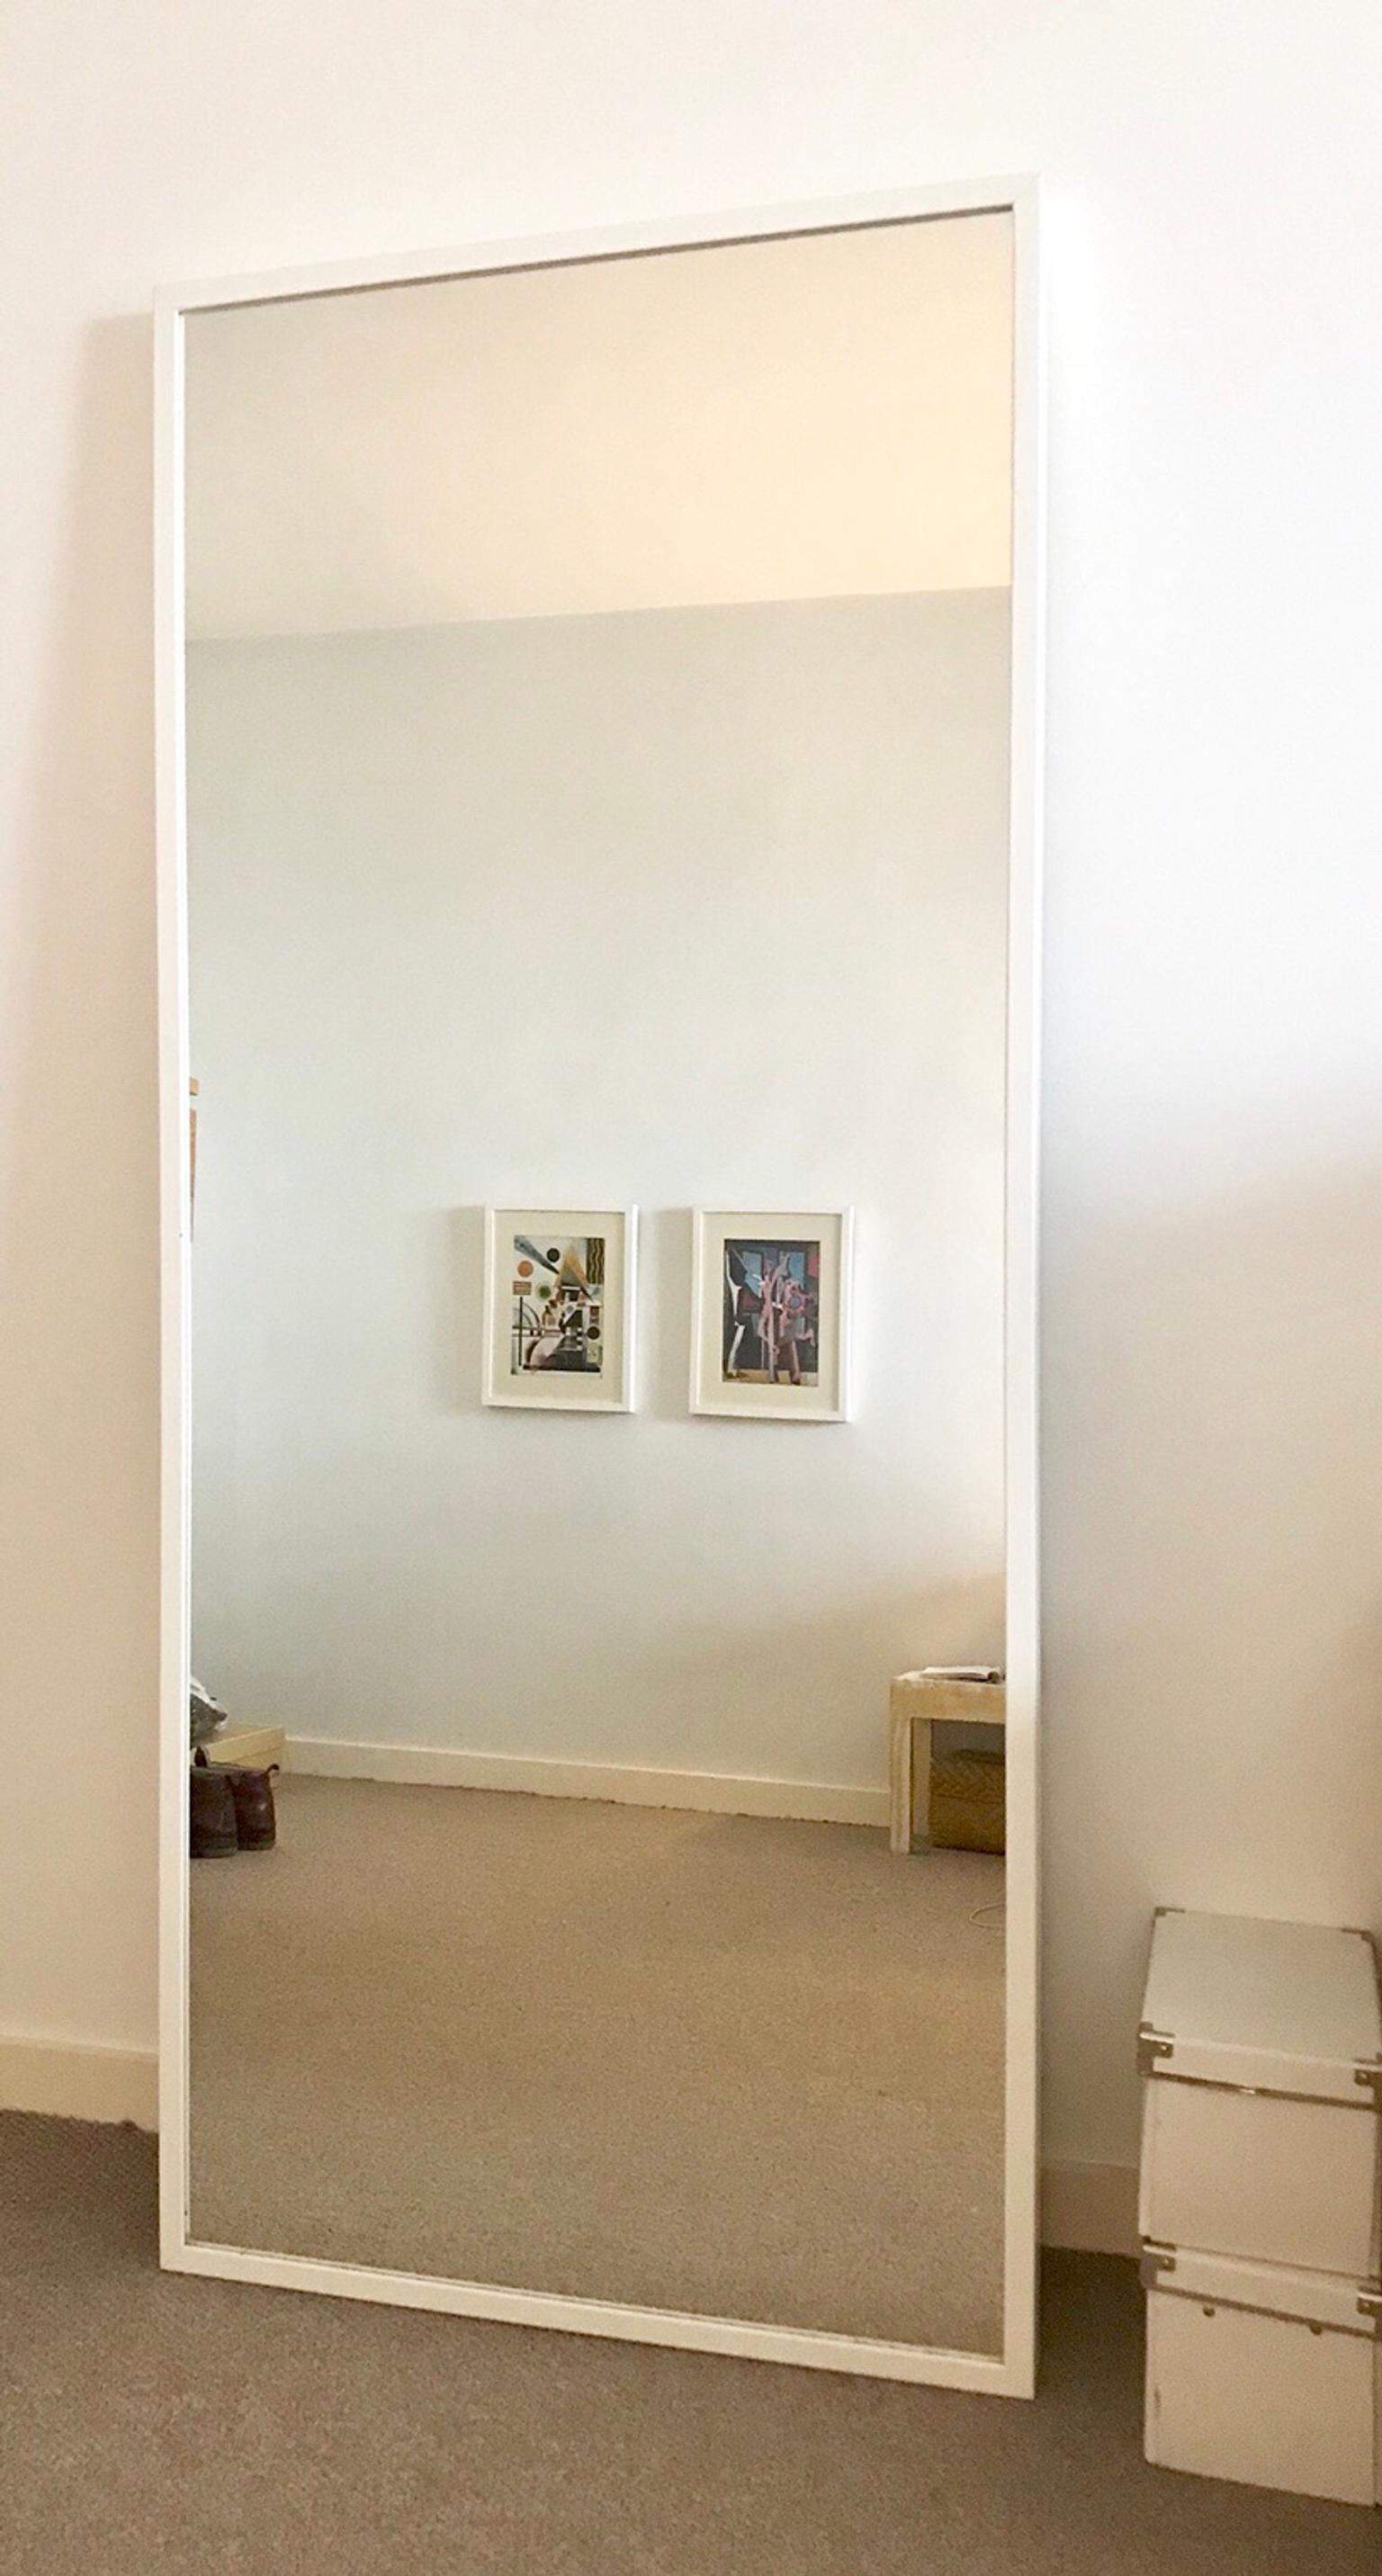 Ikea Mirror 65x 150 cm in NW3 Camden for £22.00 for sale - Shpock